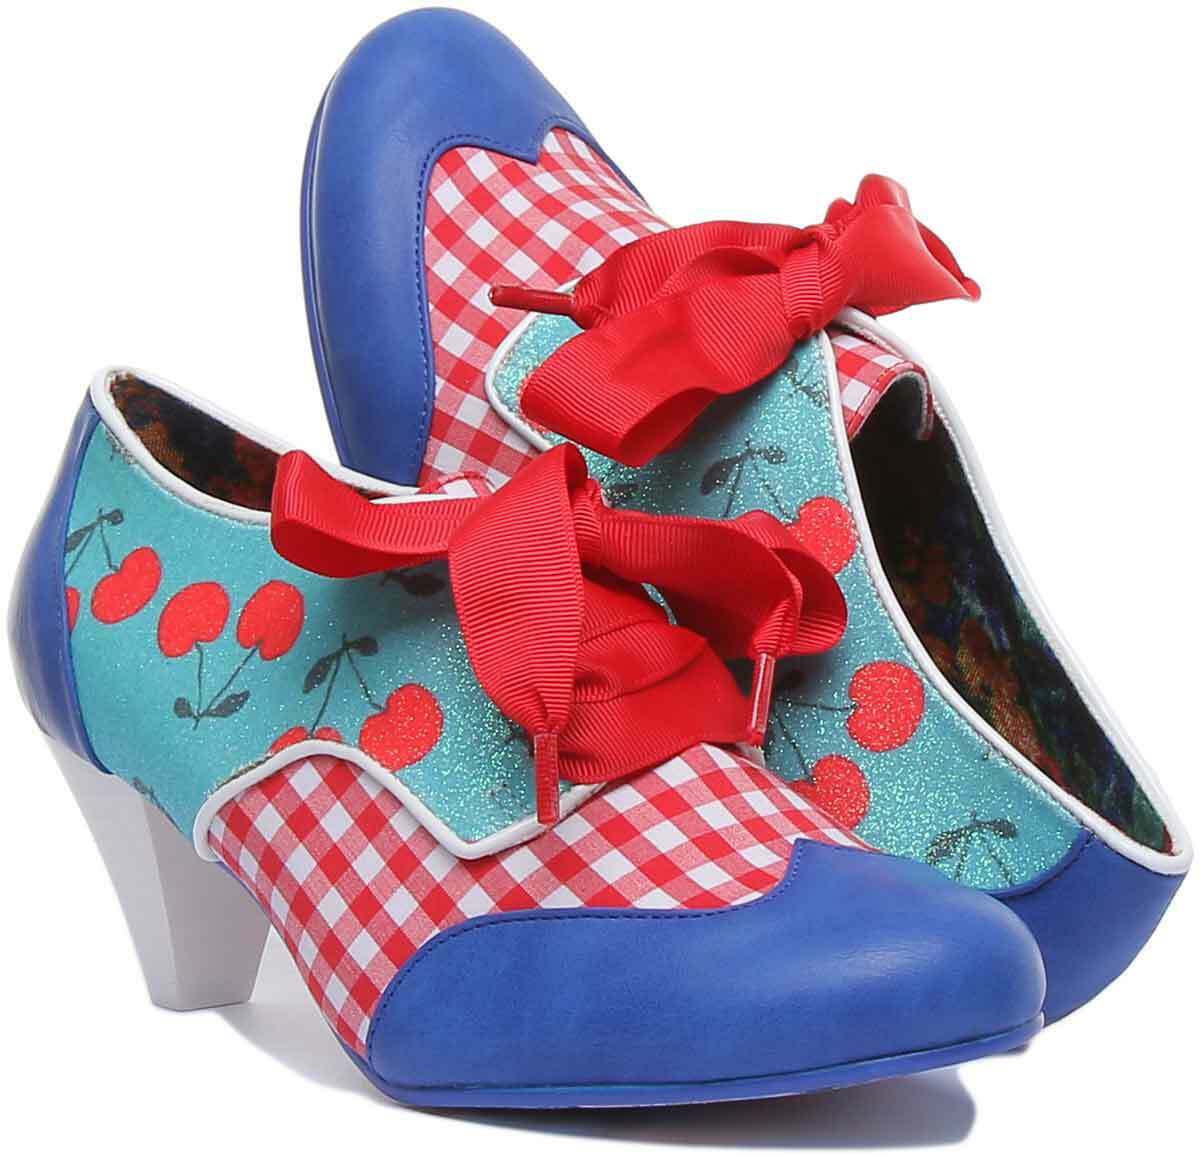 End of Story Blue Red Check Mid Heel - Rockamilly-Shoes-Vintage